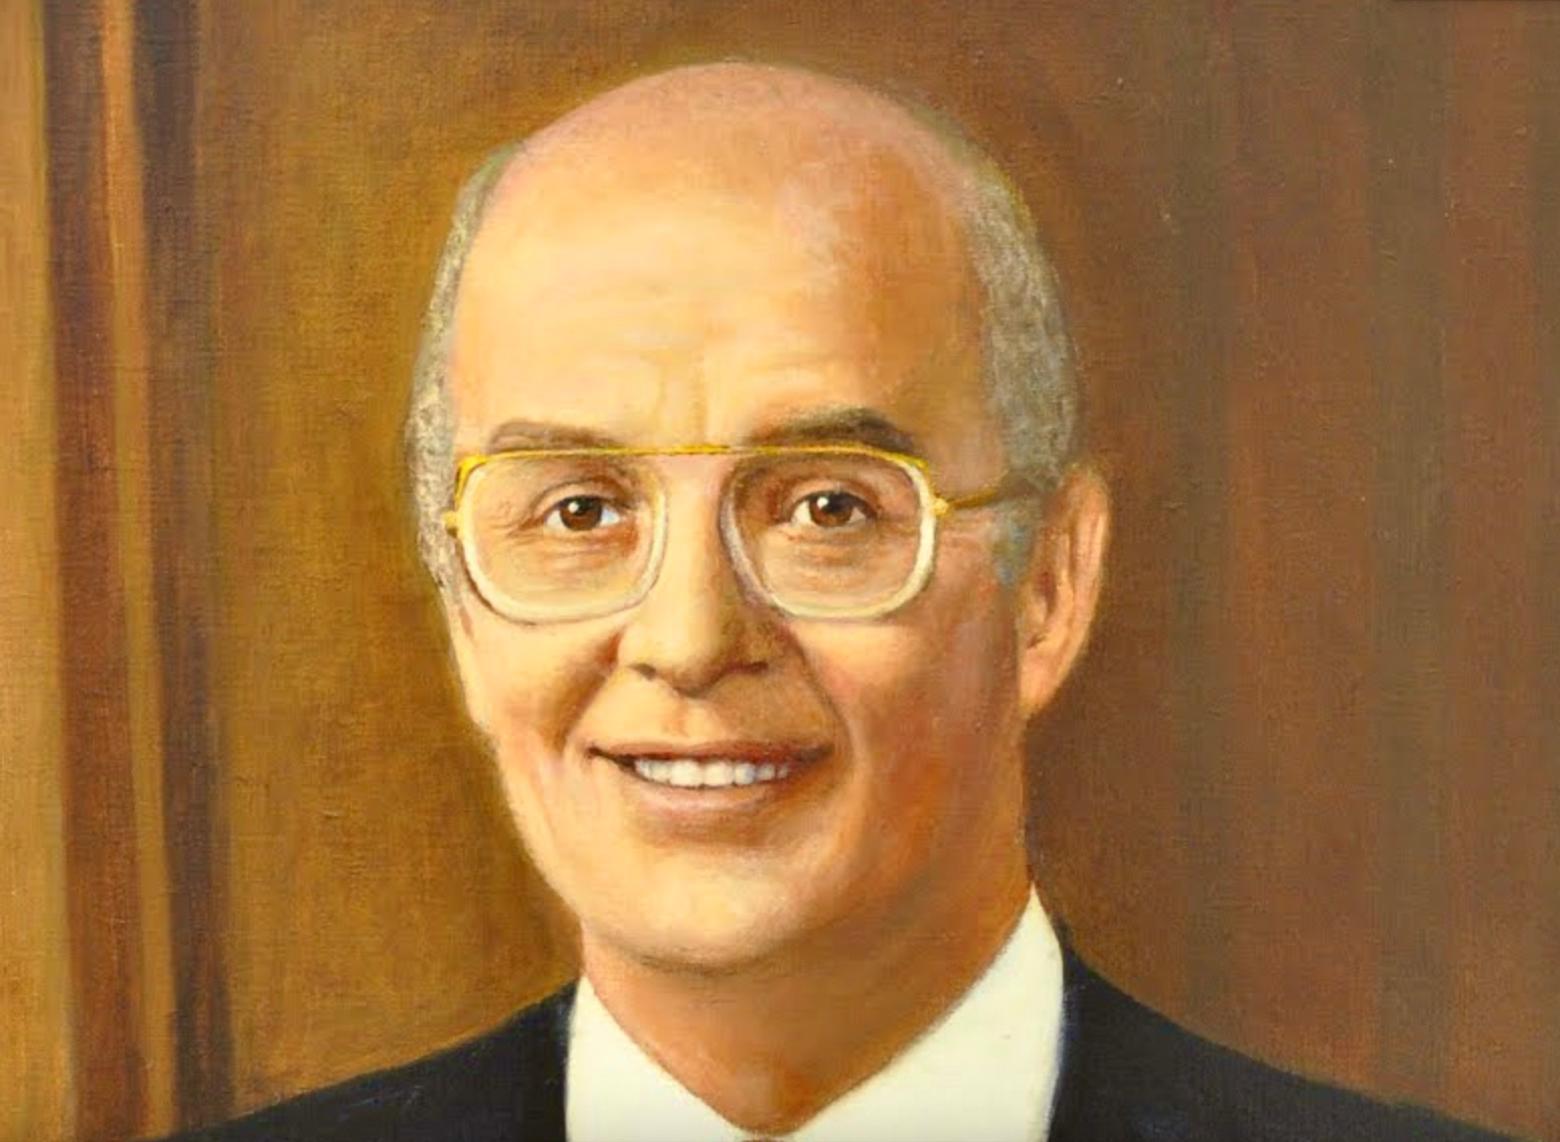 Official portrait of Interior Secretary James G. Watt painted by Irving Resnikoff. Image courtesy of US Department of the Interior Museum